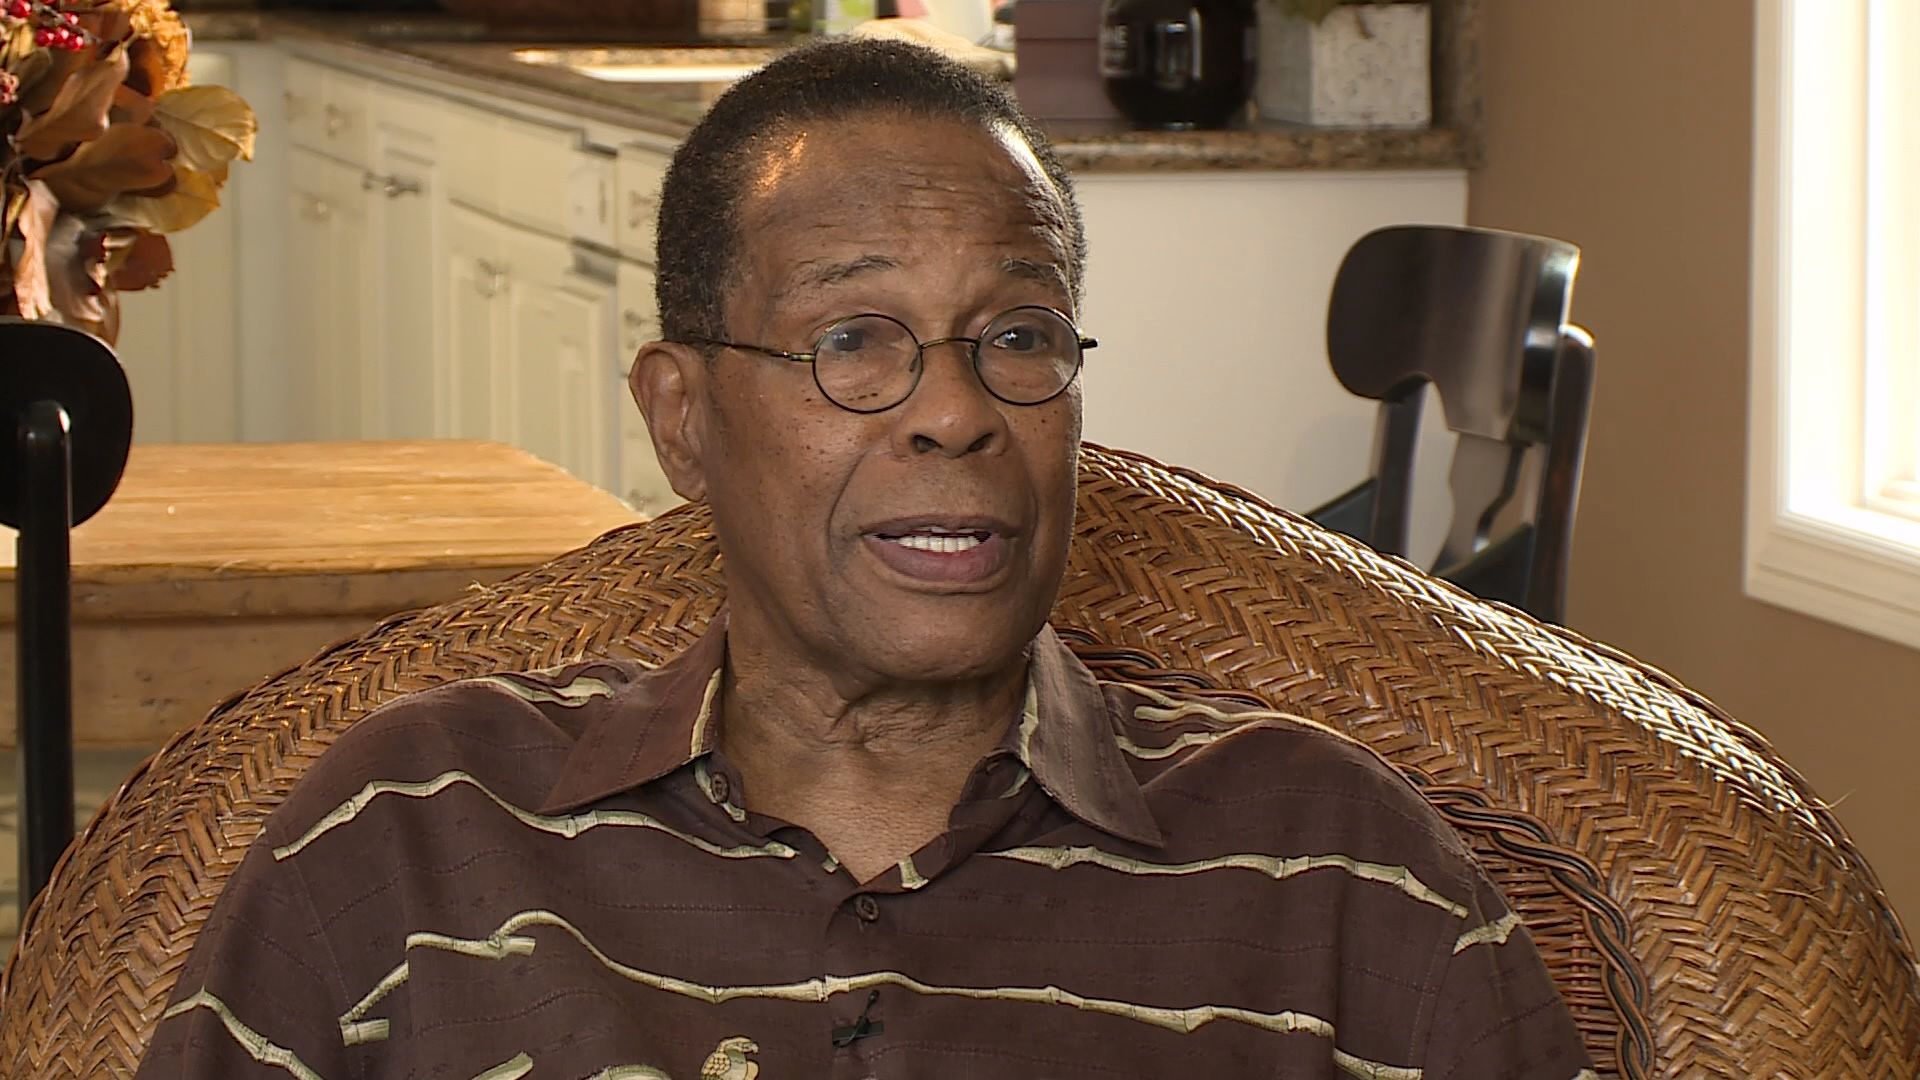 Baseball legend Rod Carew met 'anonymous' heart donor that saved his life